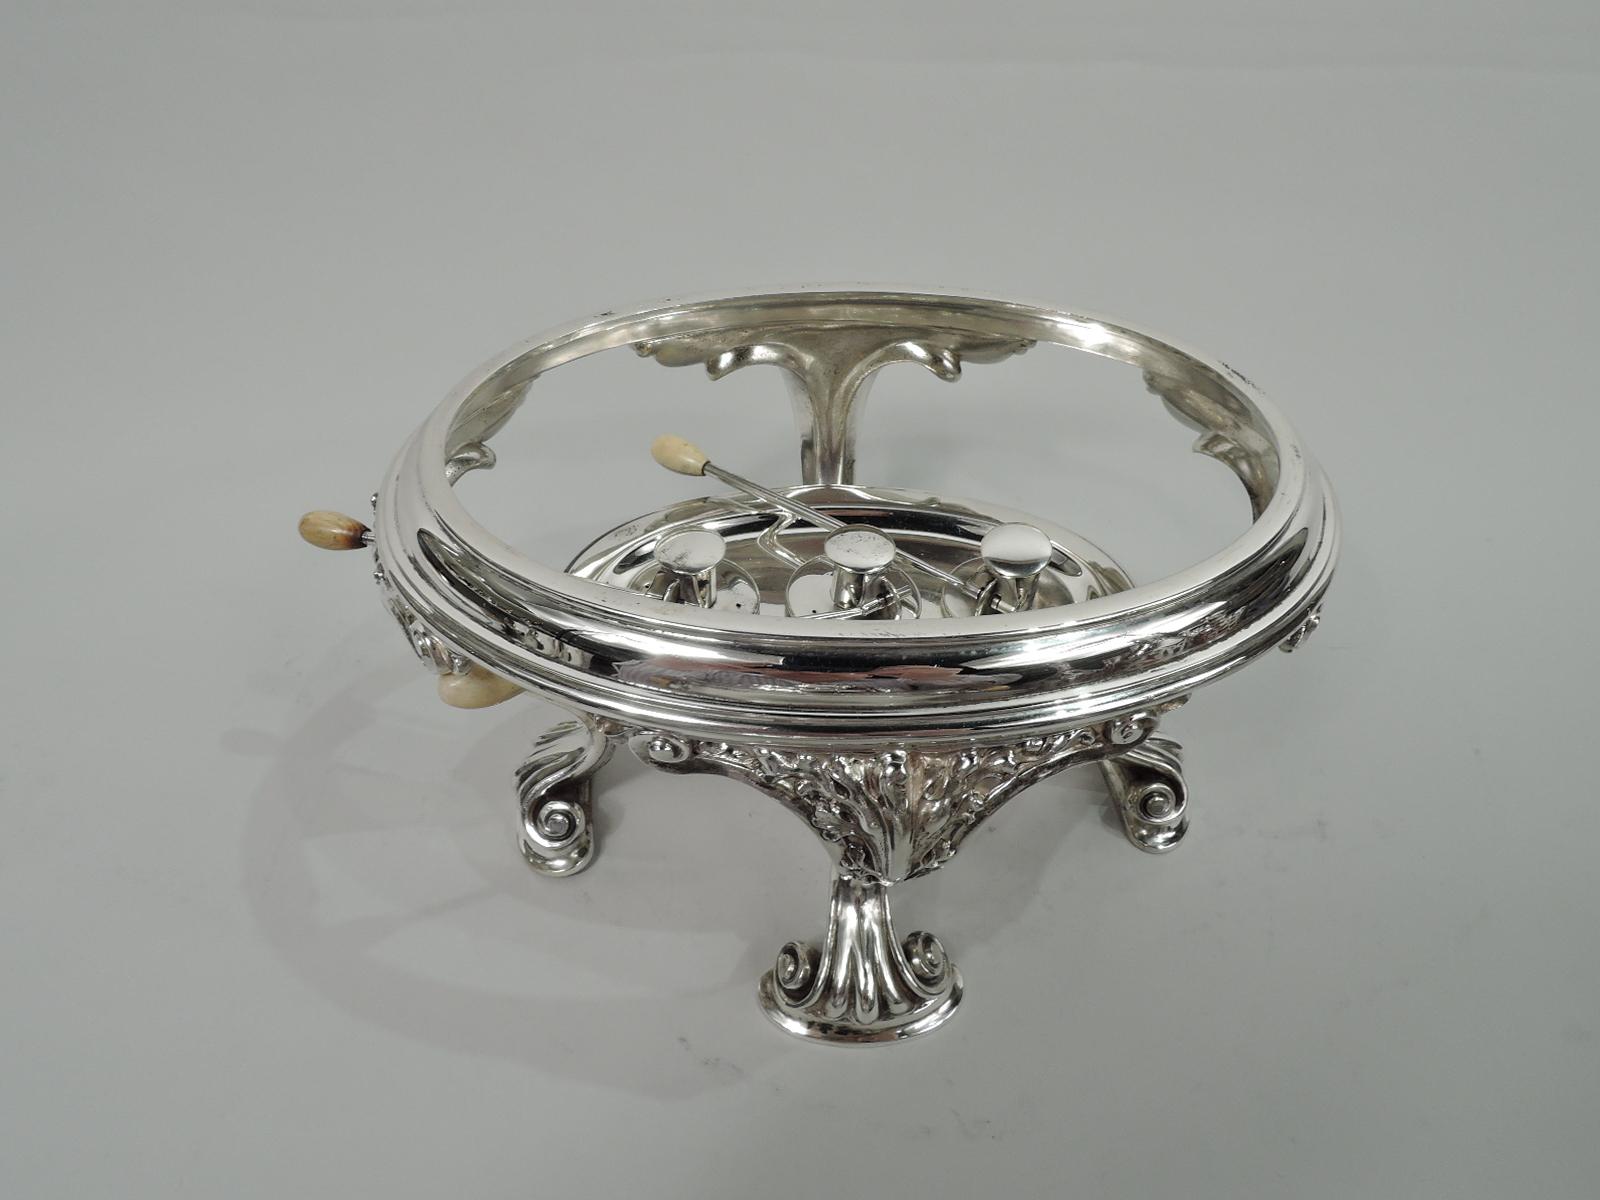 Edwardian Antique Gorham Sterling Silver Chafing Dish with Turtle Finial